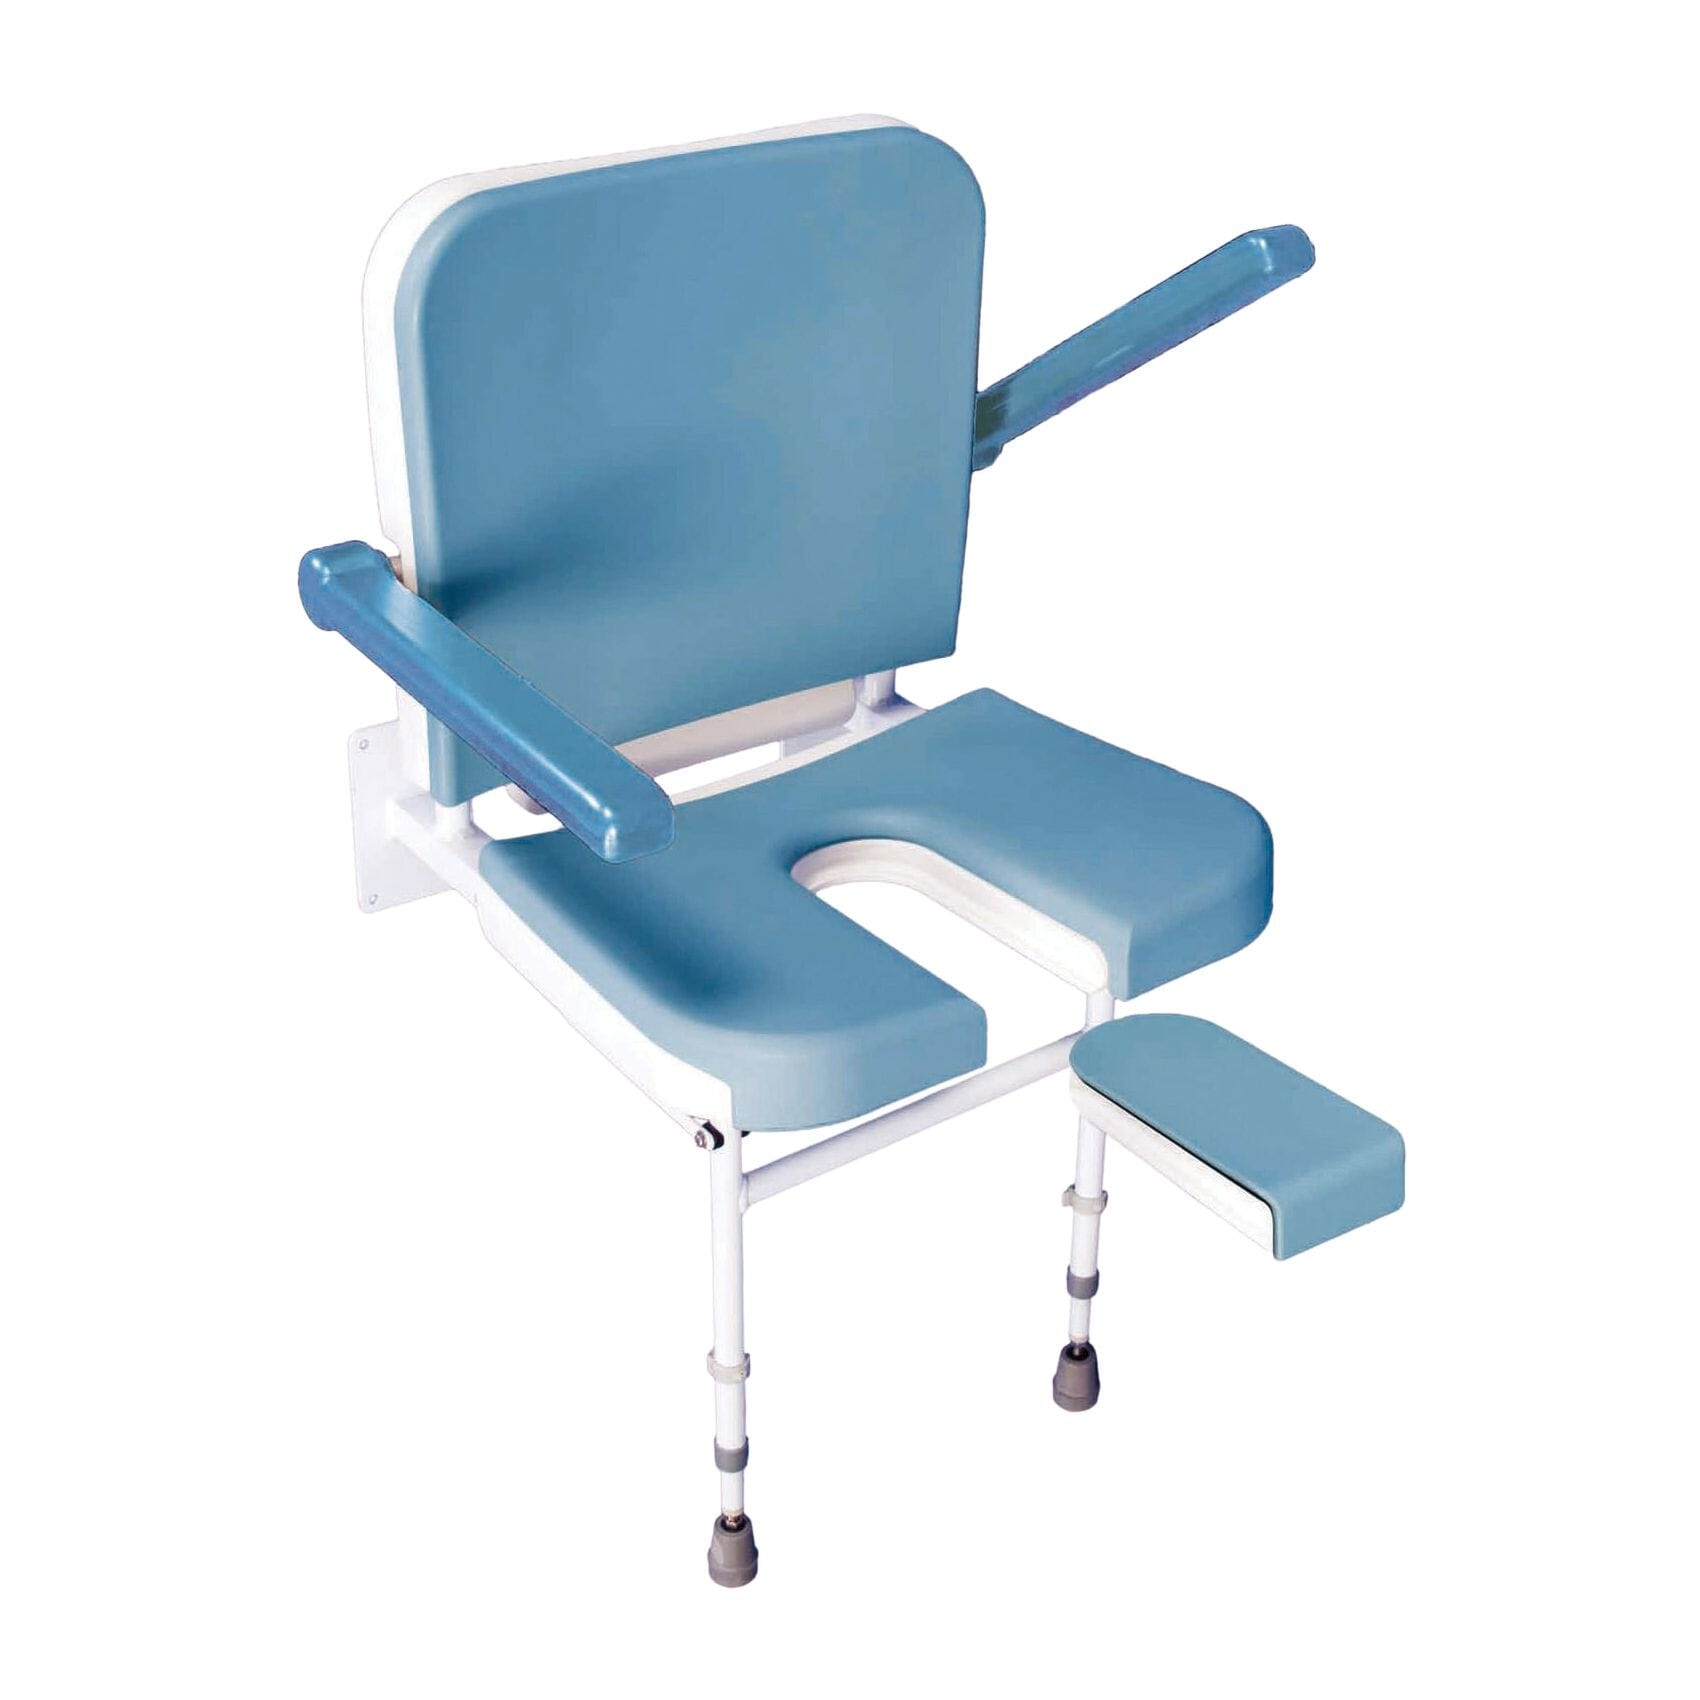 View Duo Deluxe 2 in 1 Shower Seat information